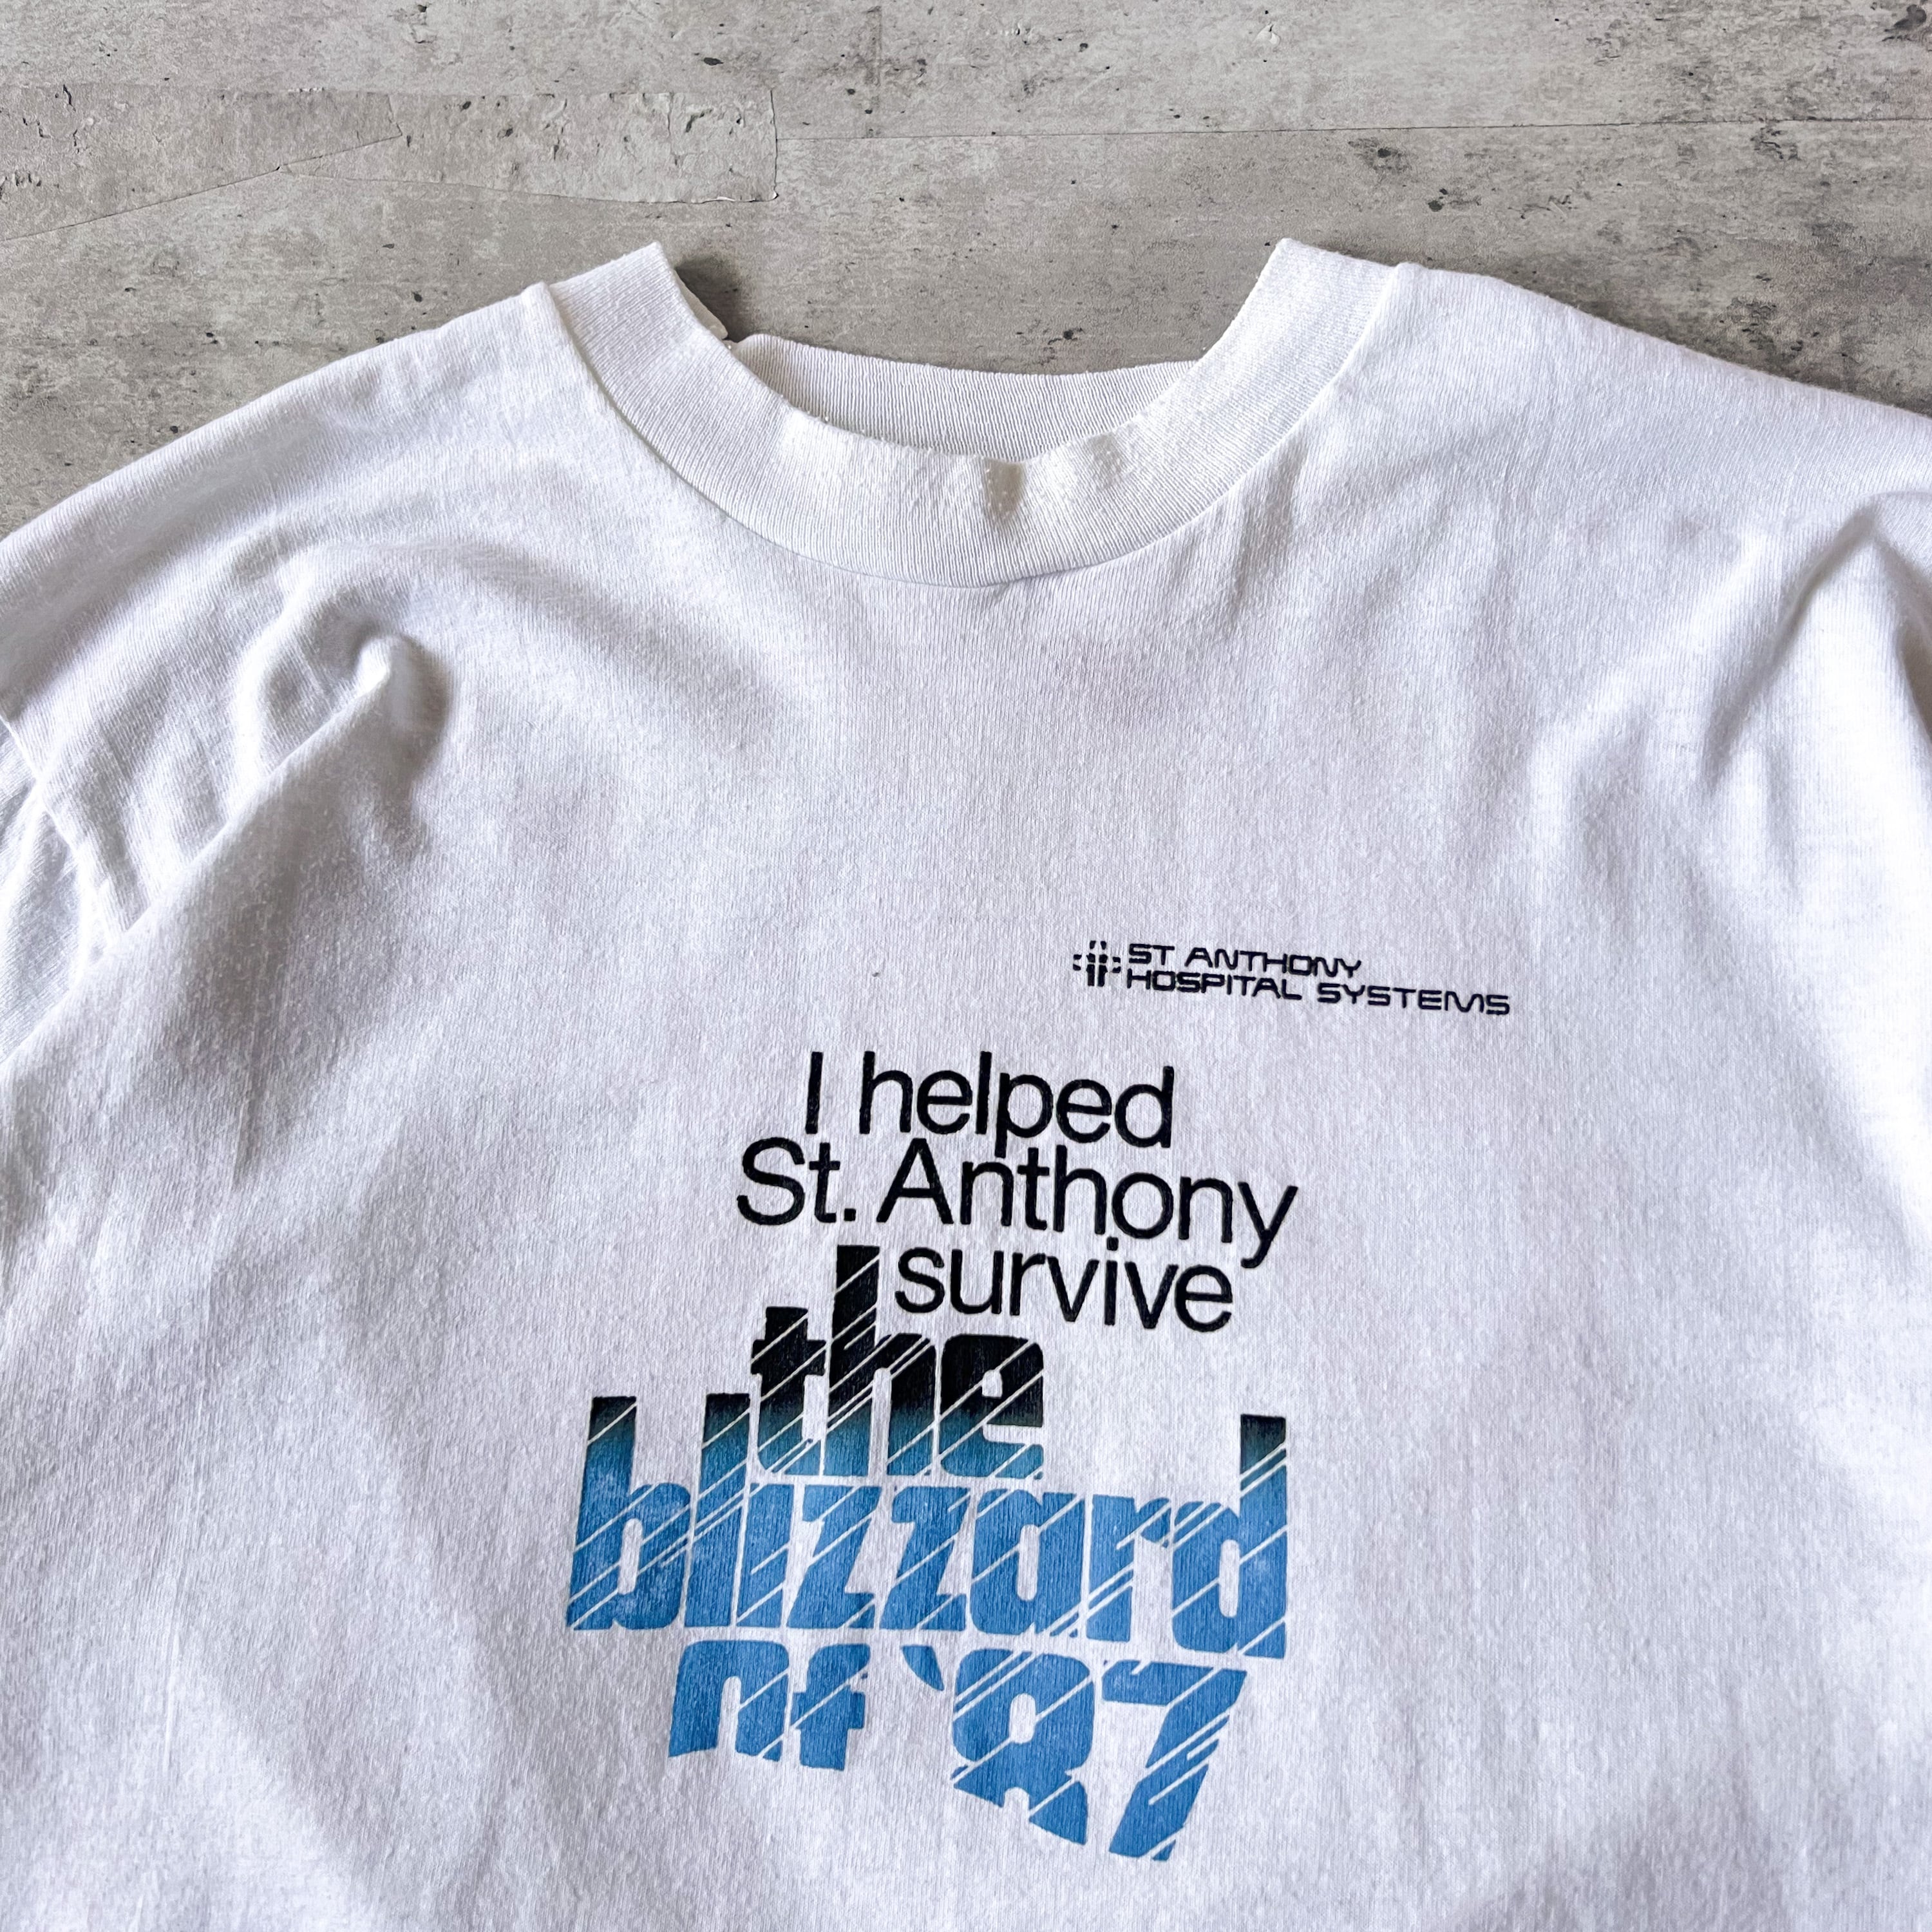 80s “St. Anthony survise” tee 80年代 ヴィンテージtシャツ 企業ロゴ ...